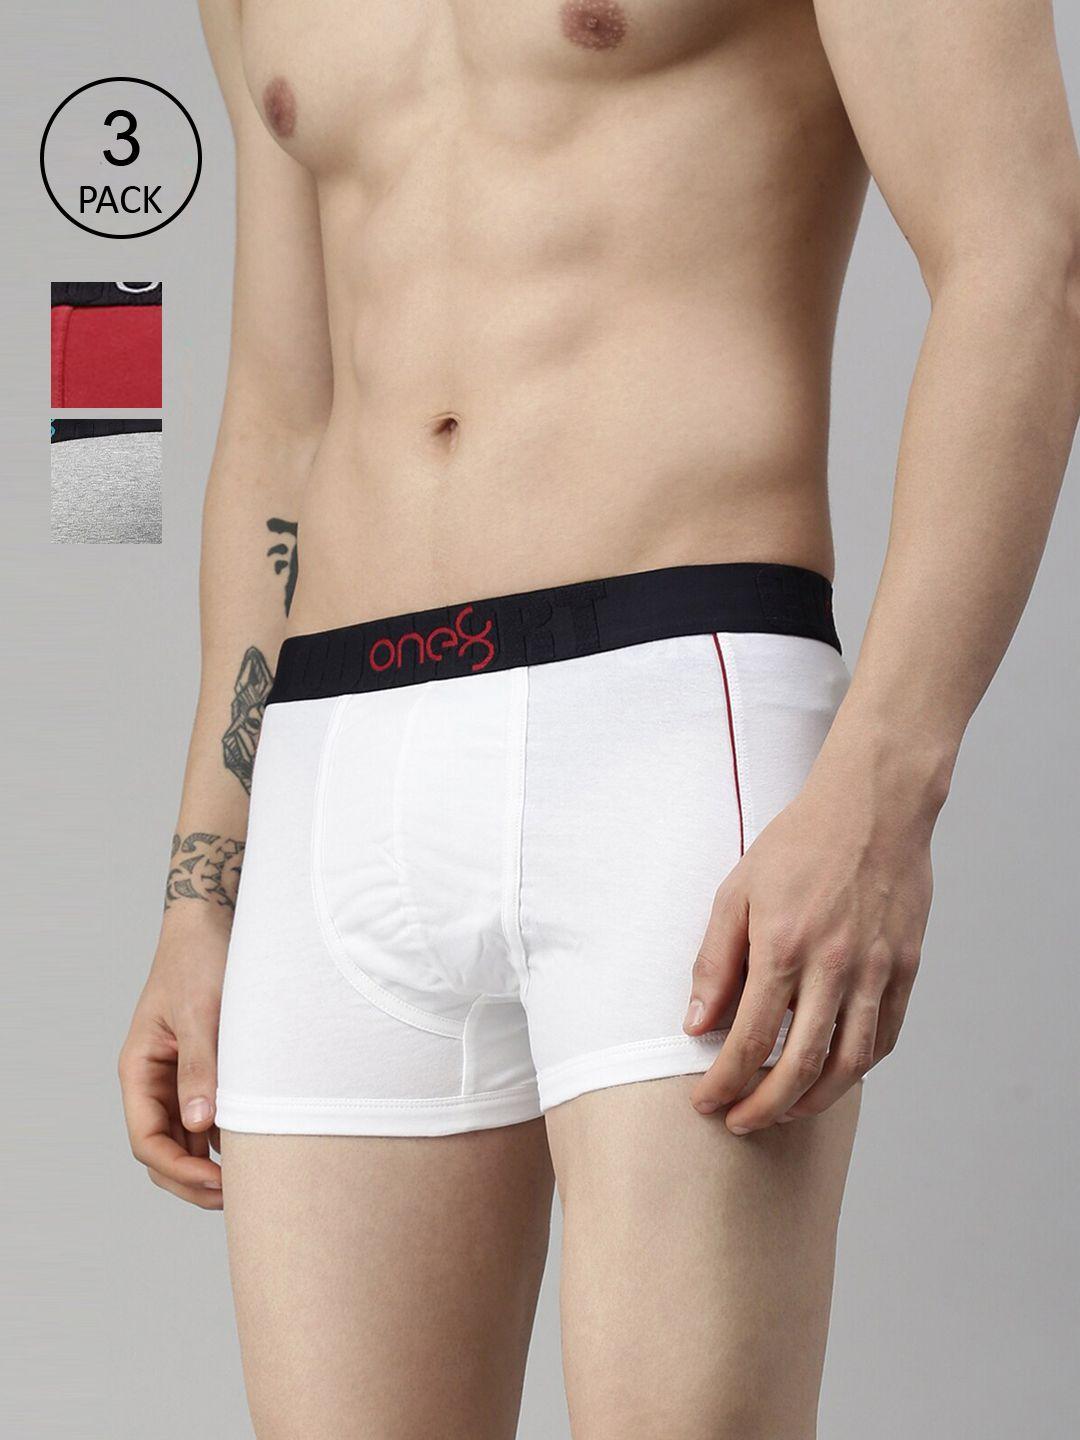 one8-by-virat-kohli-men-pack-of-3-solid-cotton-trunk